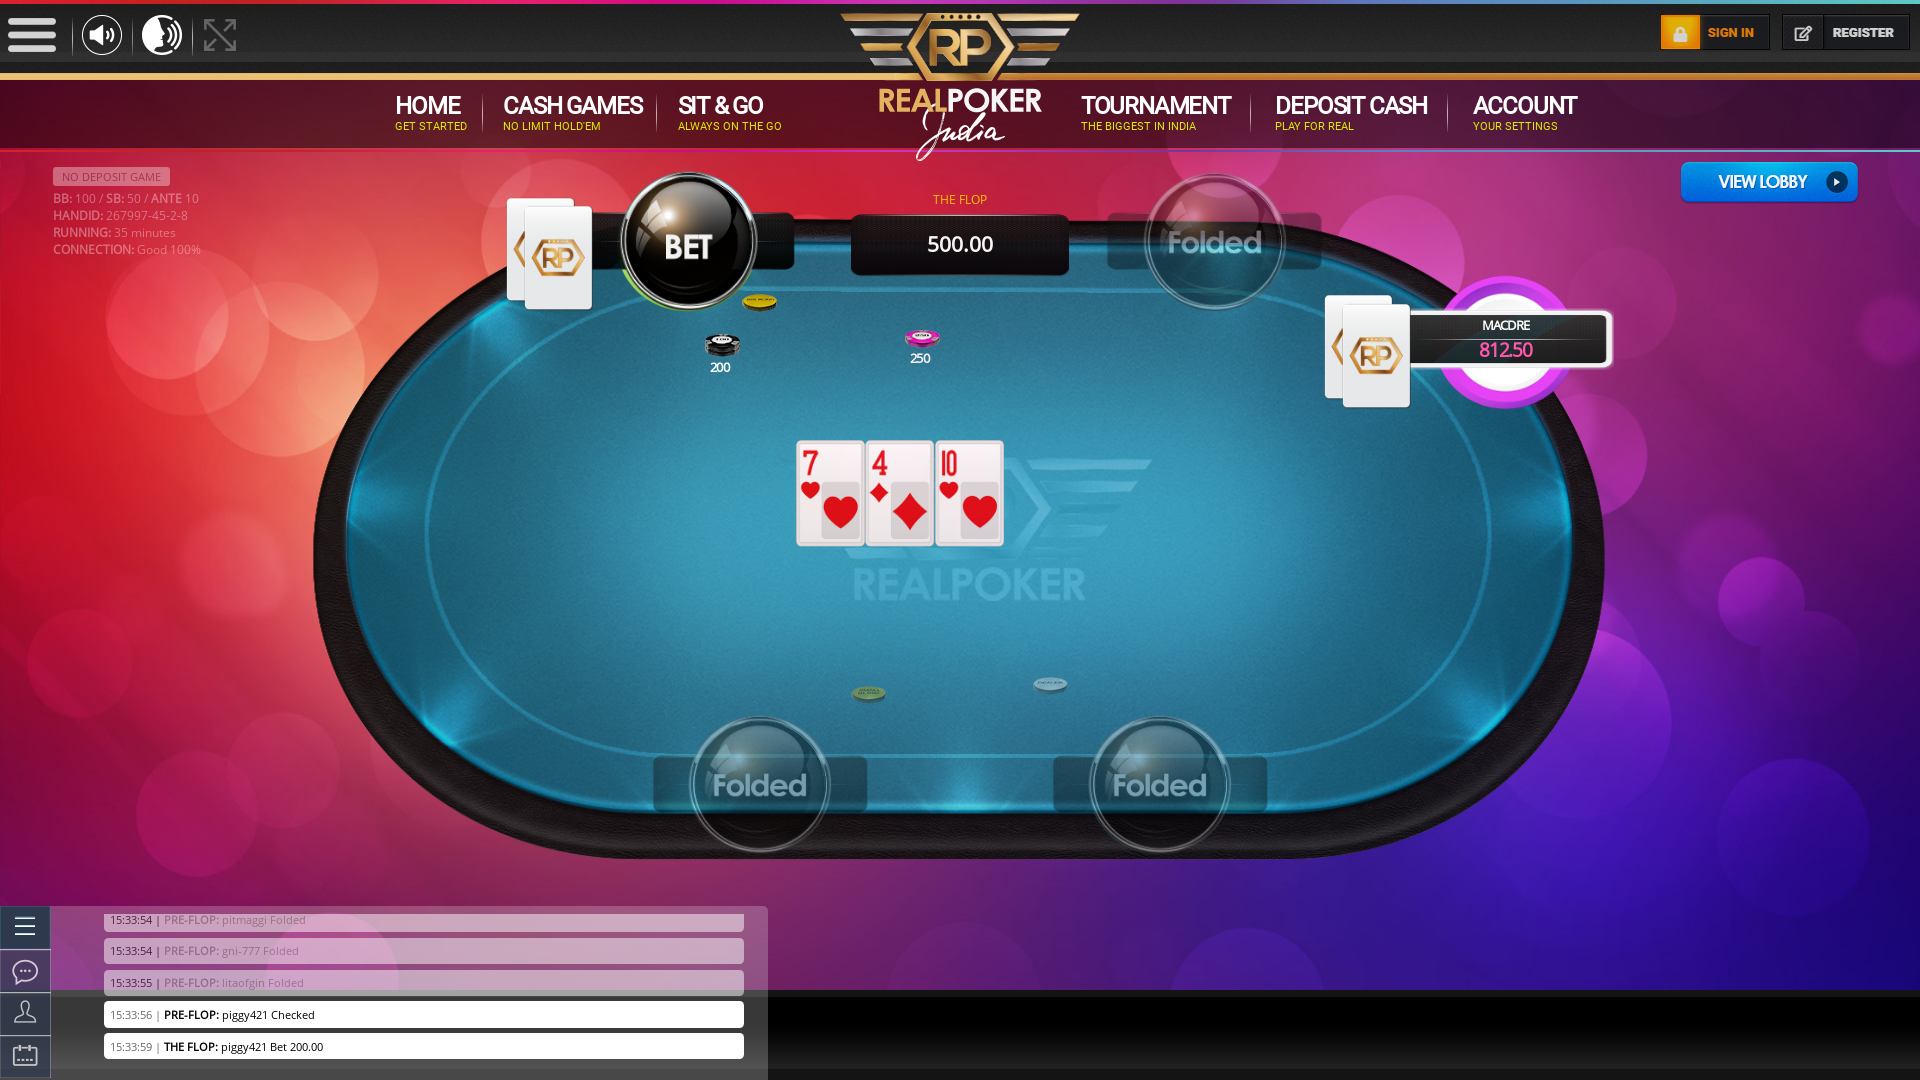 Online poker on a 10 player table in the 34th minute match up